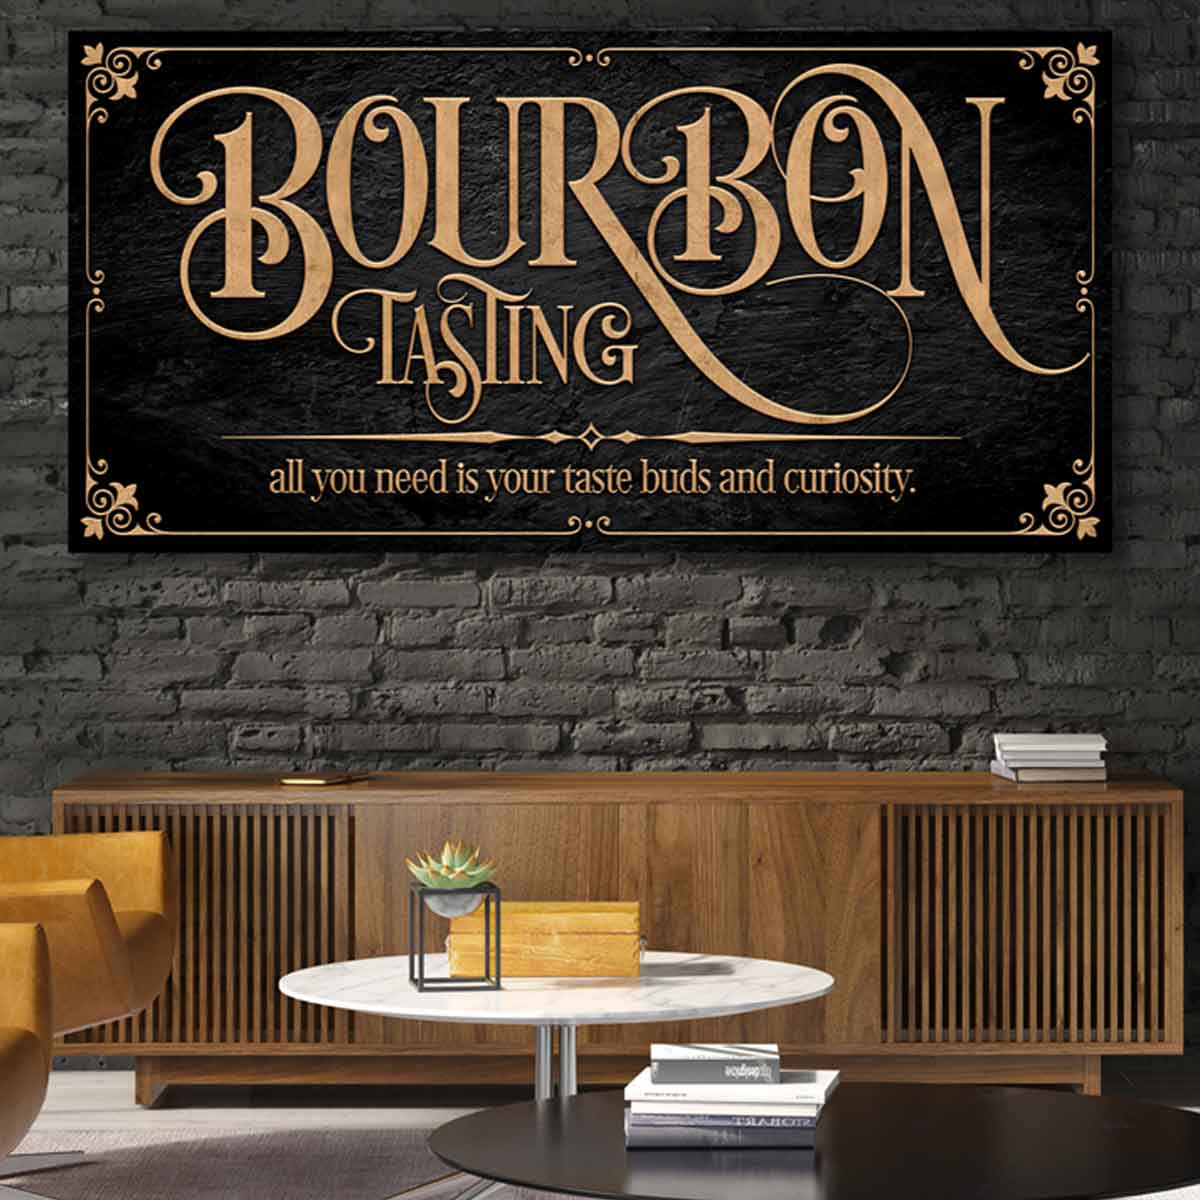 Bourbon Bar Decor- Bourbon Tasting Sign on black stone with gold words that say Bourbon Tasting: All you need is your taste buds and curiosity